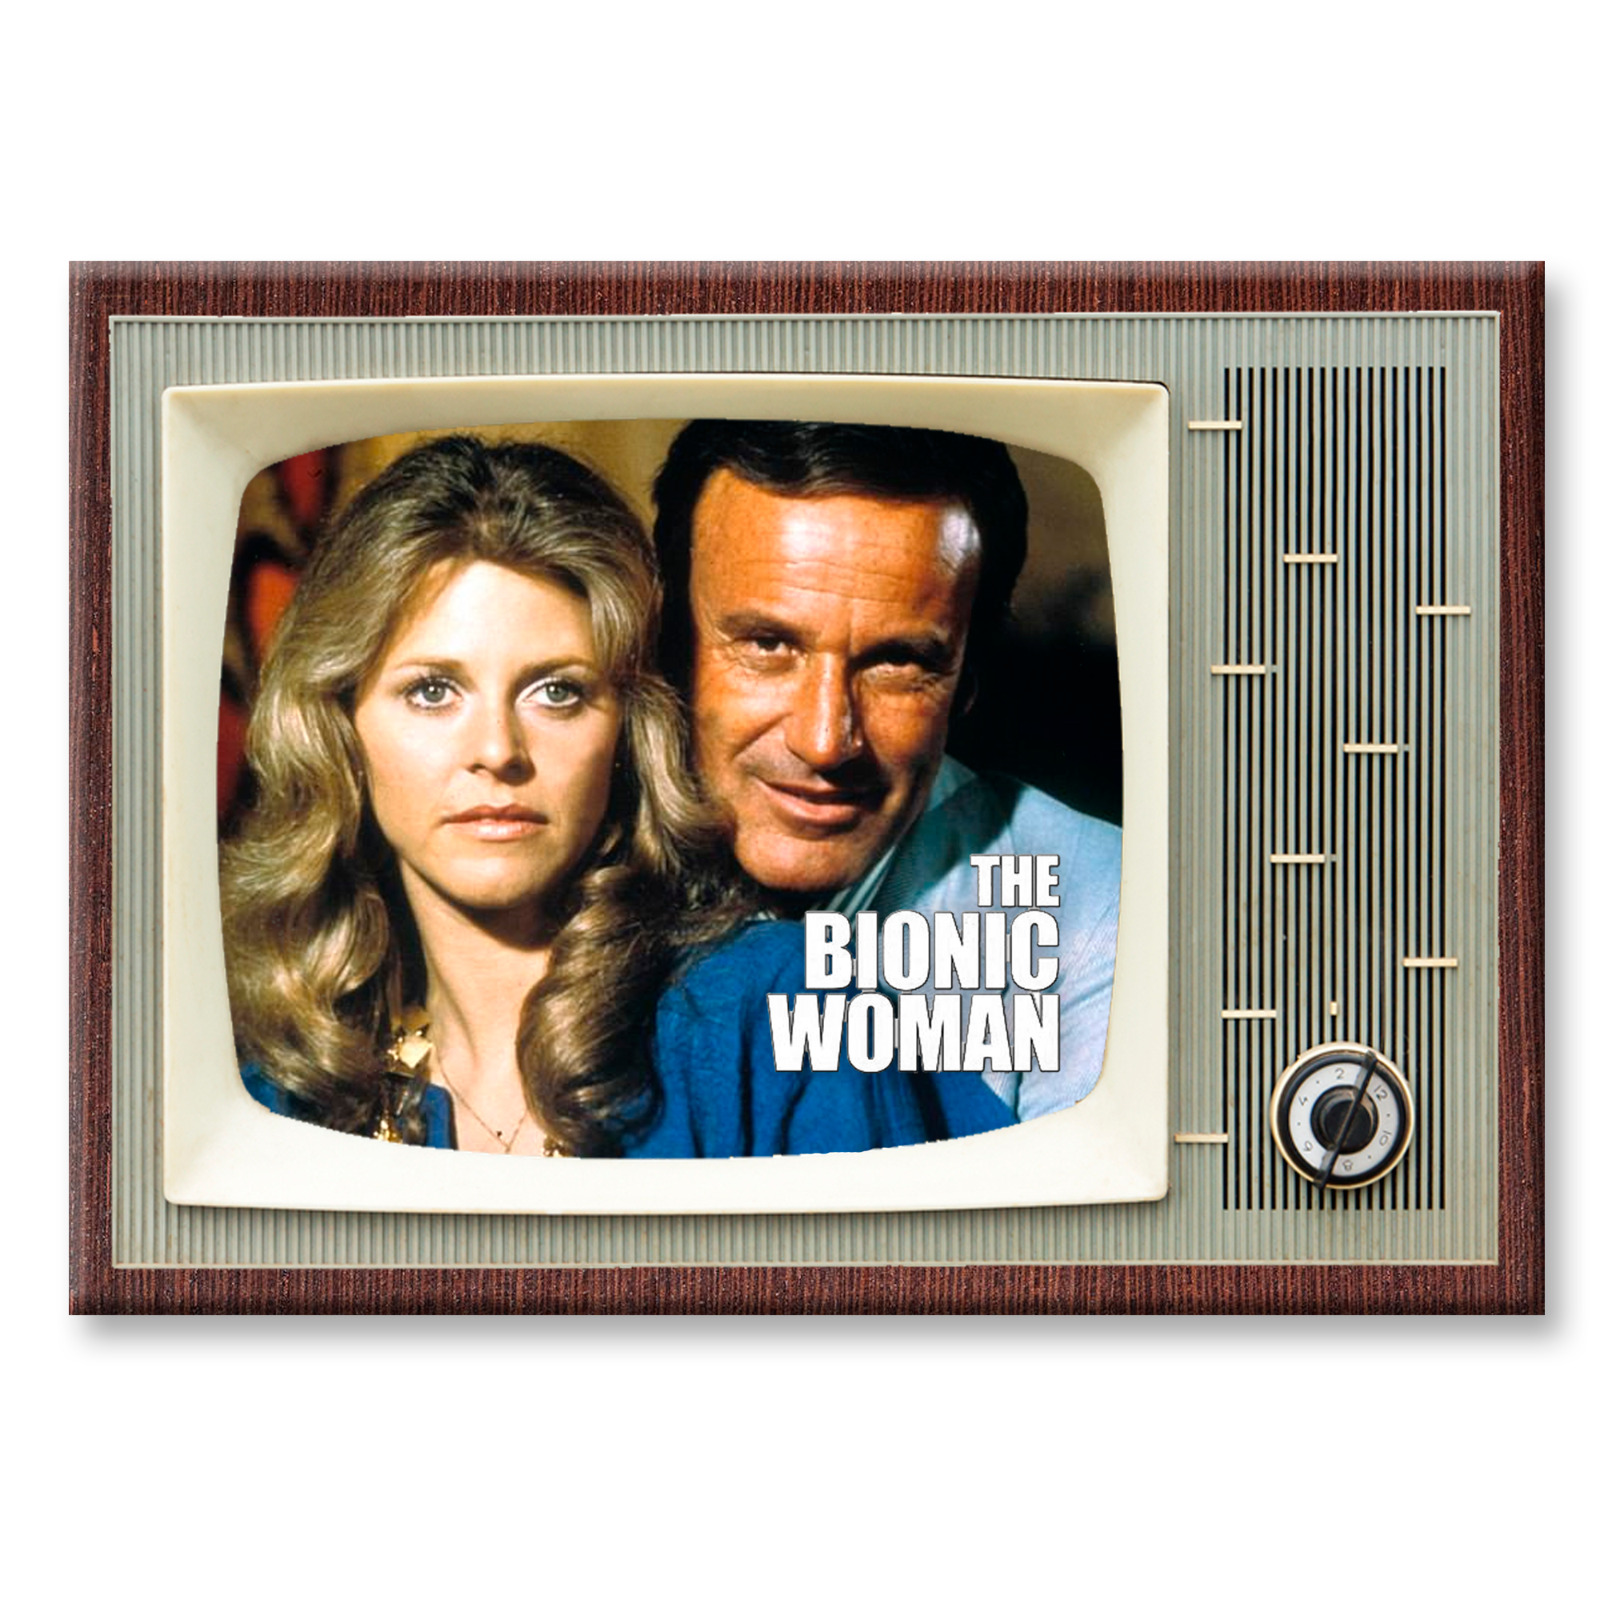 THE BIONIC WOMAN TV Show Classic TV 3.5 inches x 2.5 inches FRIDGE MAGNET